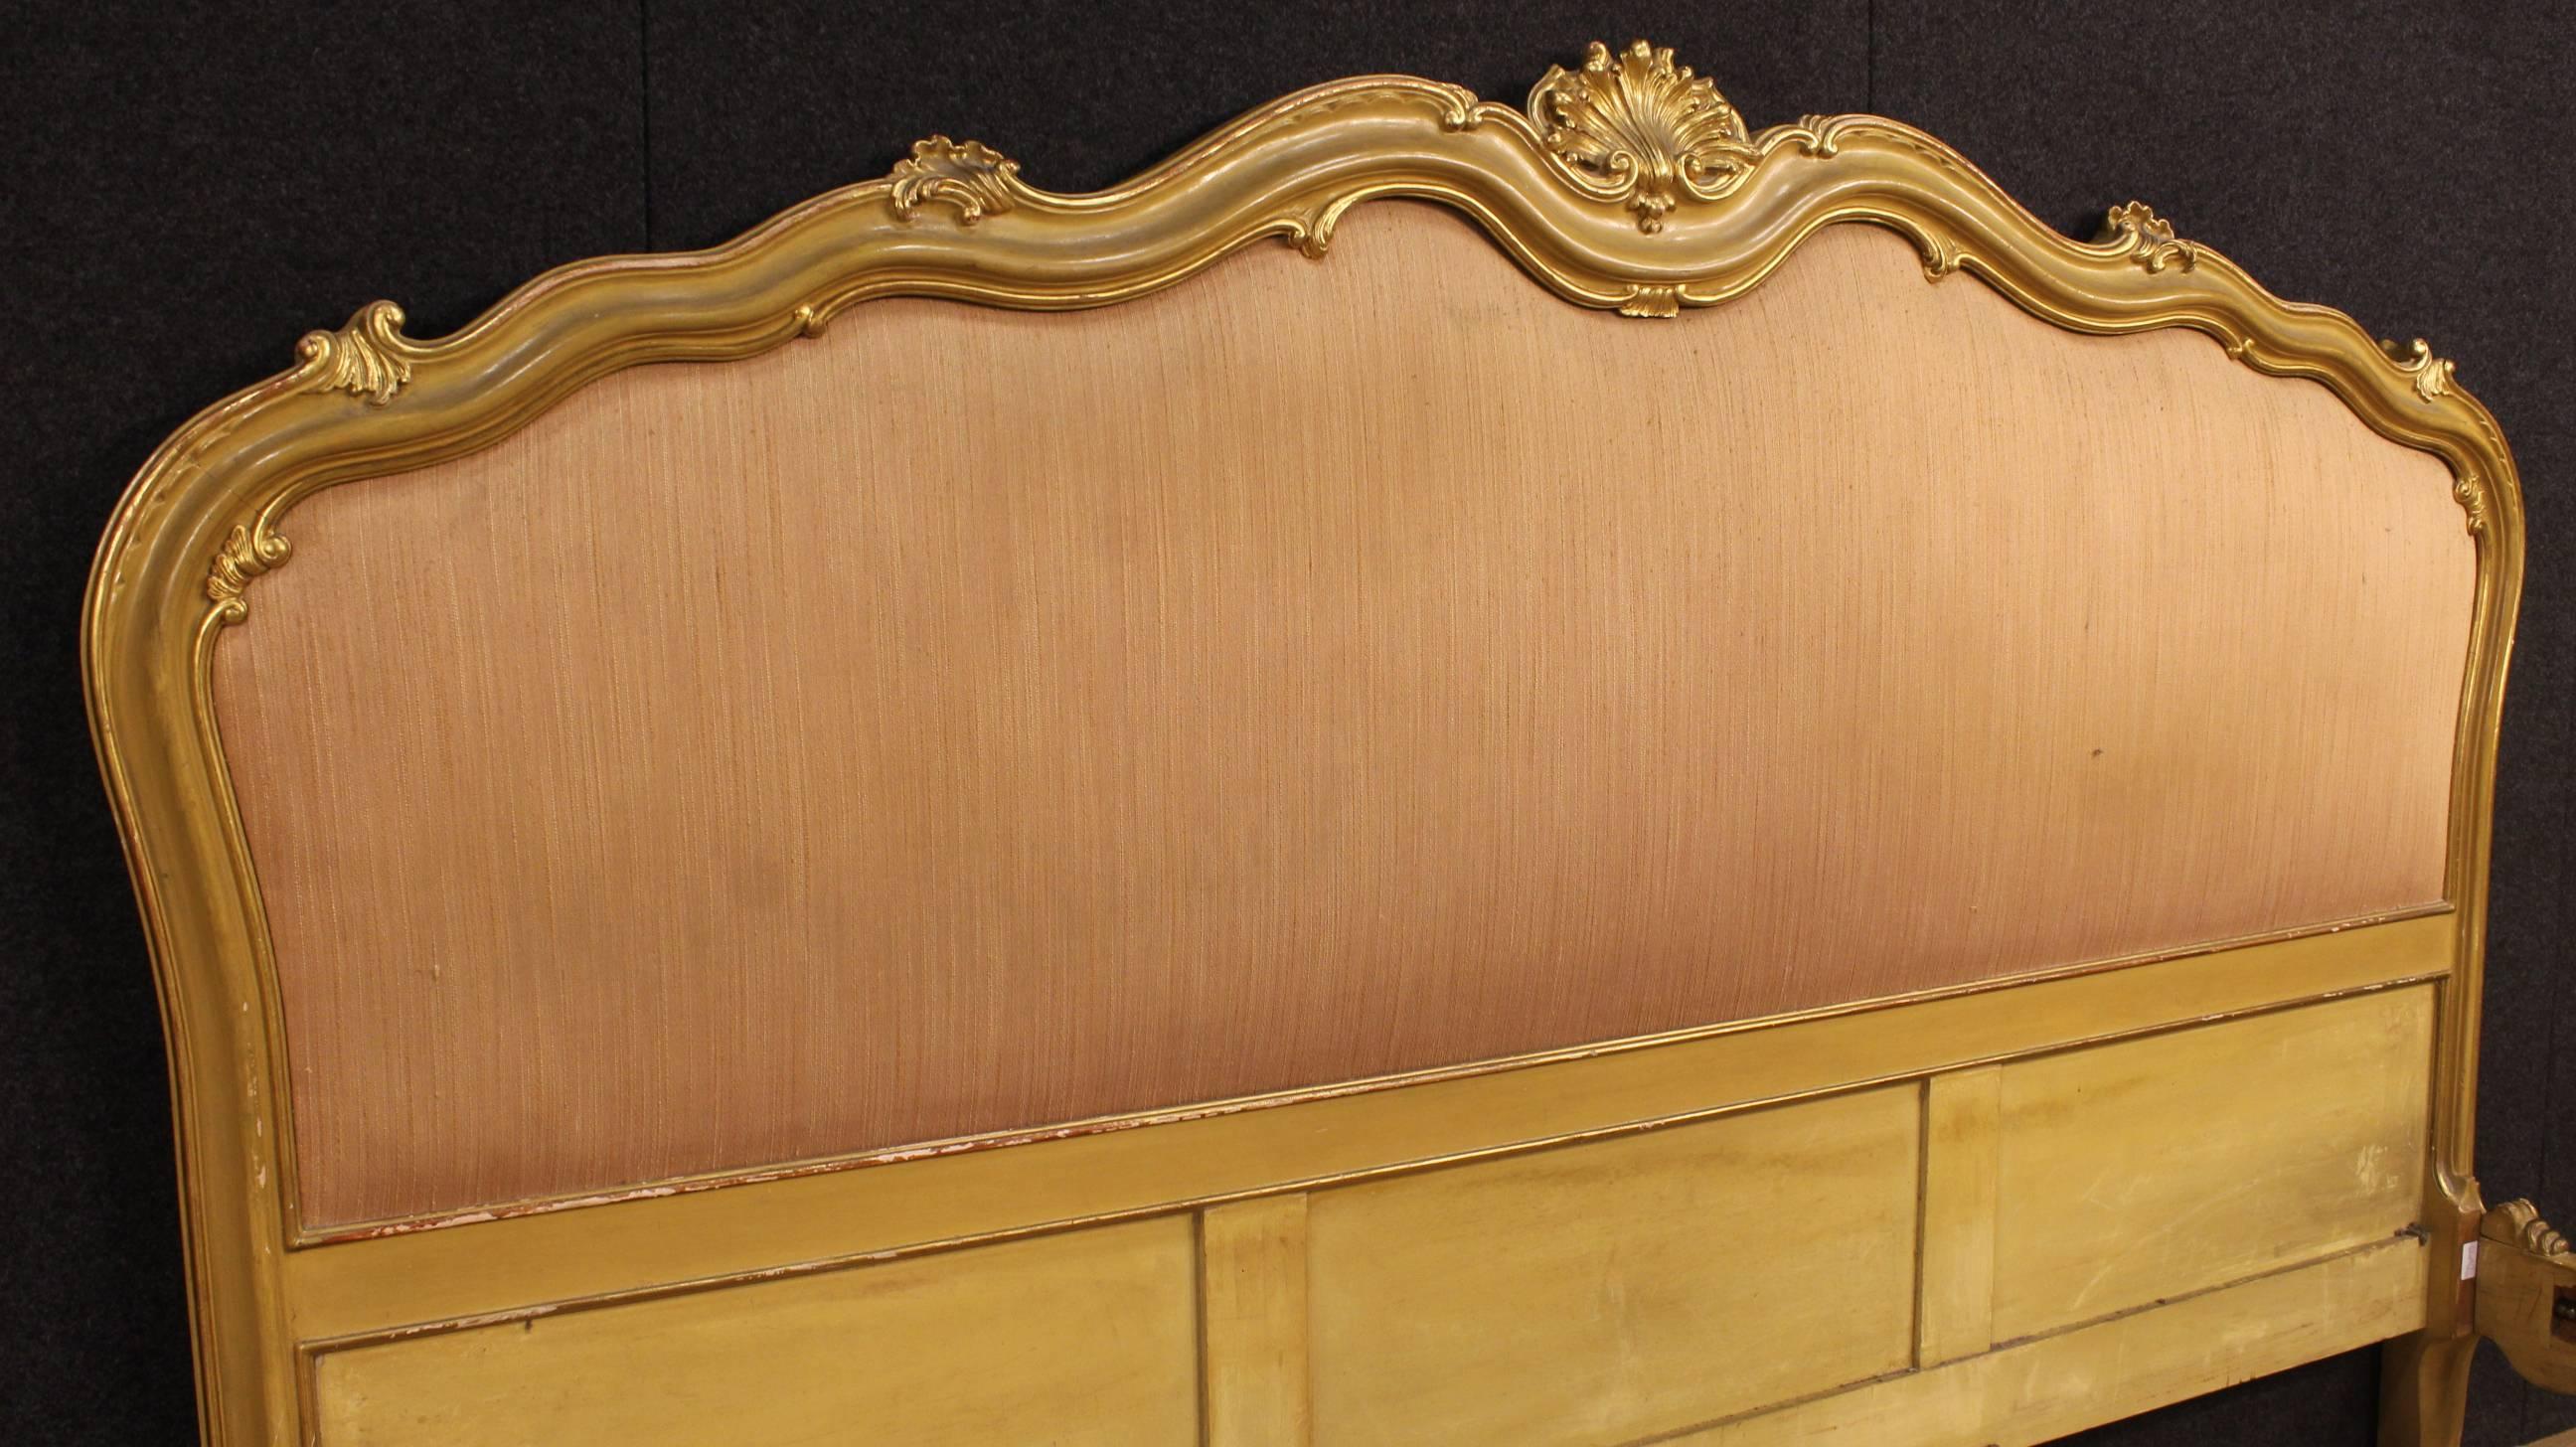 Great Venetian double bed. Furniture of the 20th century in finely carved, painted and gilded wood, of beautiful decoration. Padded headboard upholstered in pink fabric with some signs of wear. Internal measure: W 184 x D 205 cm. It has some small